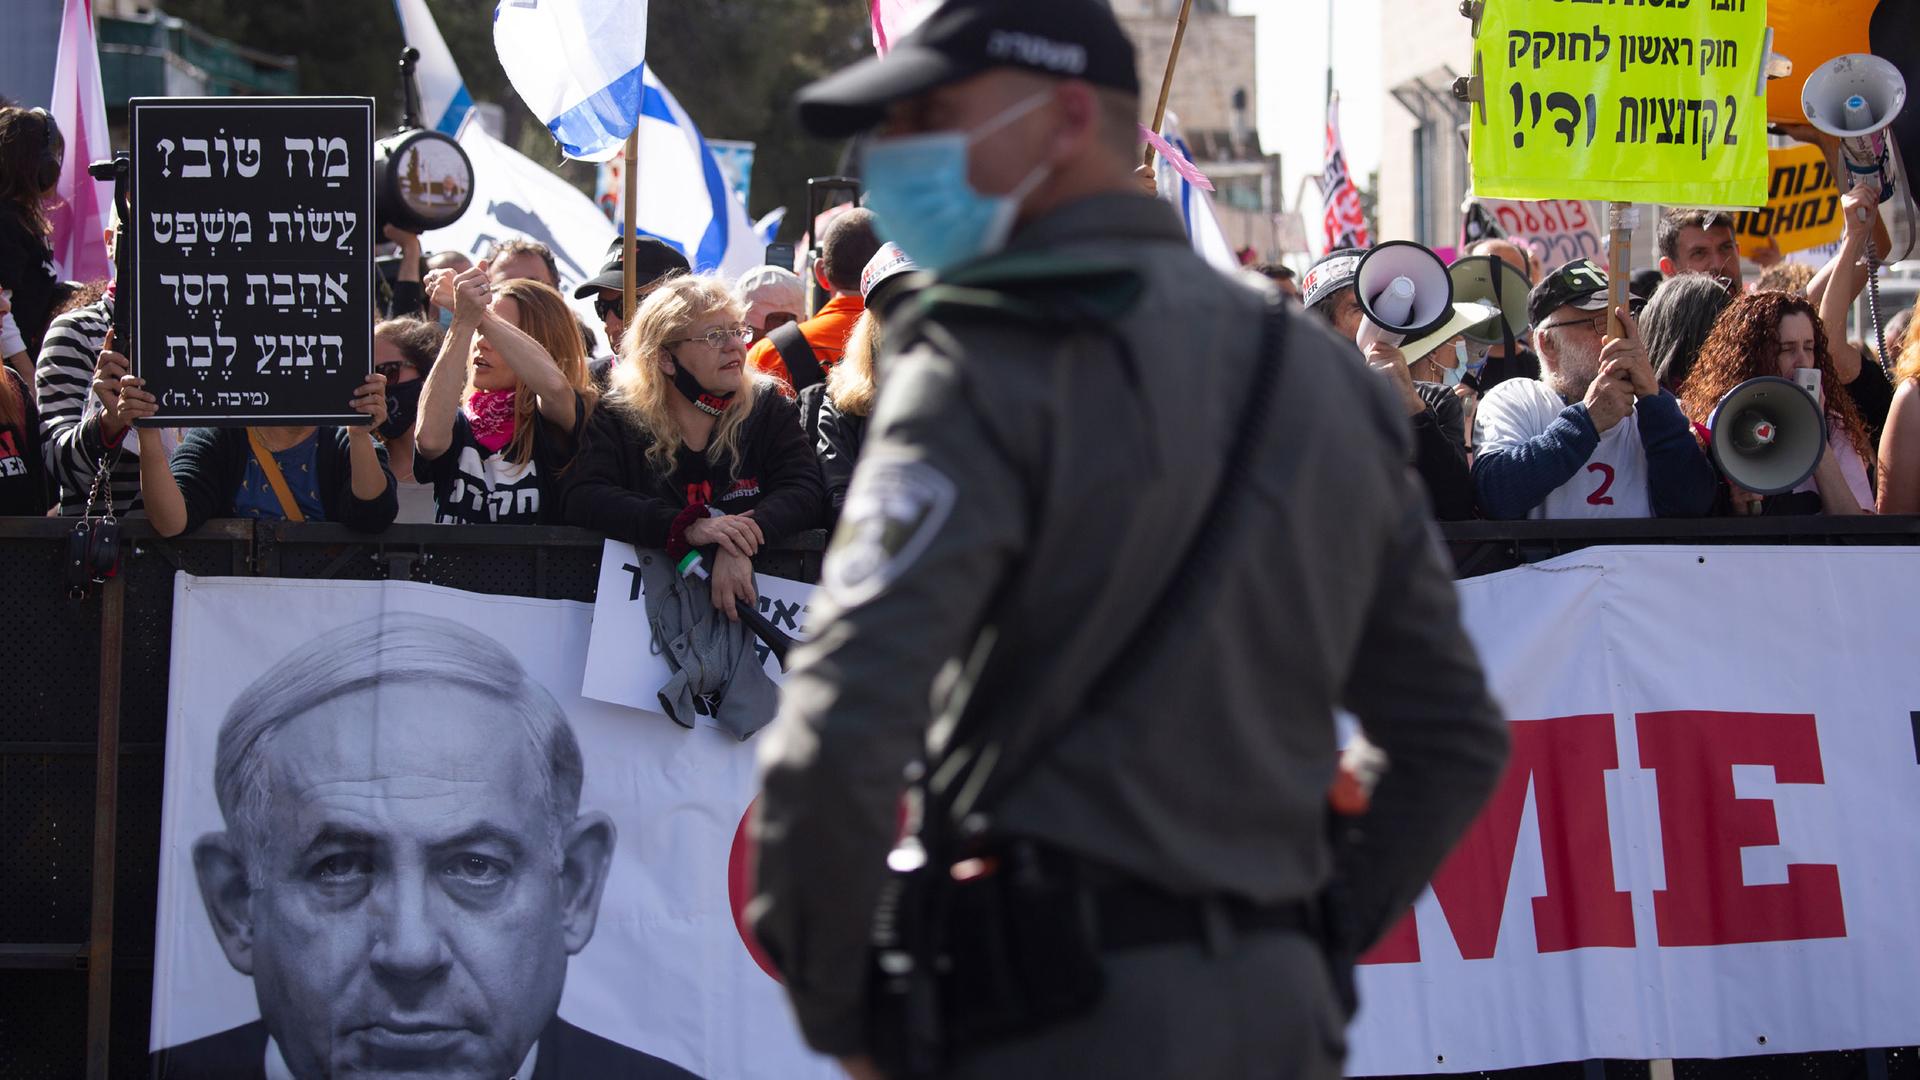 A large crowd of people are shown with several holding a banner showing Israeli Prime Minister Benjamin Netanyahu's face.